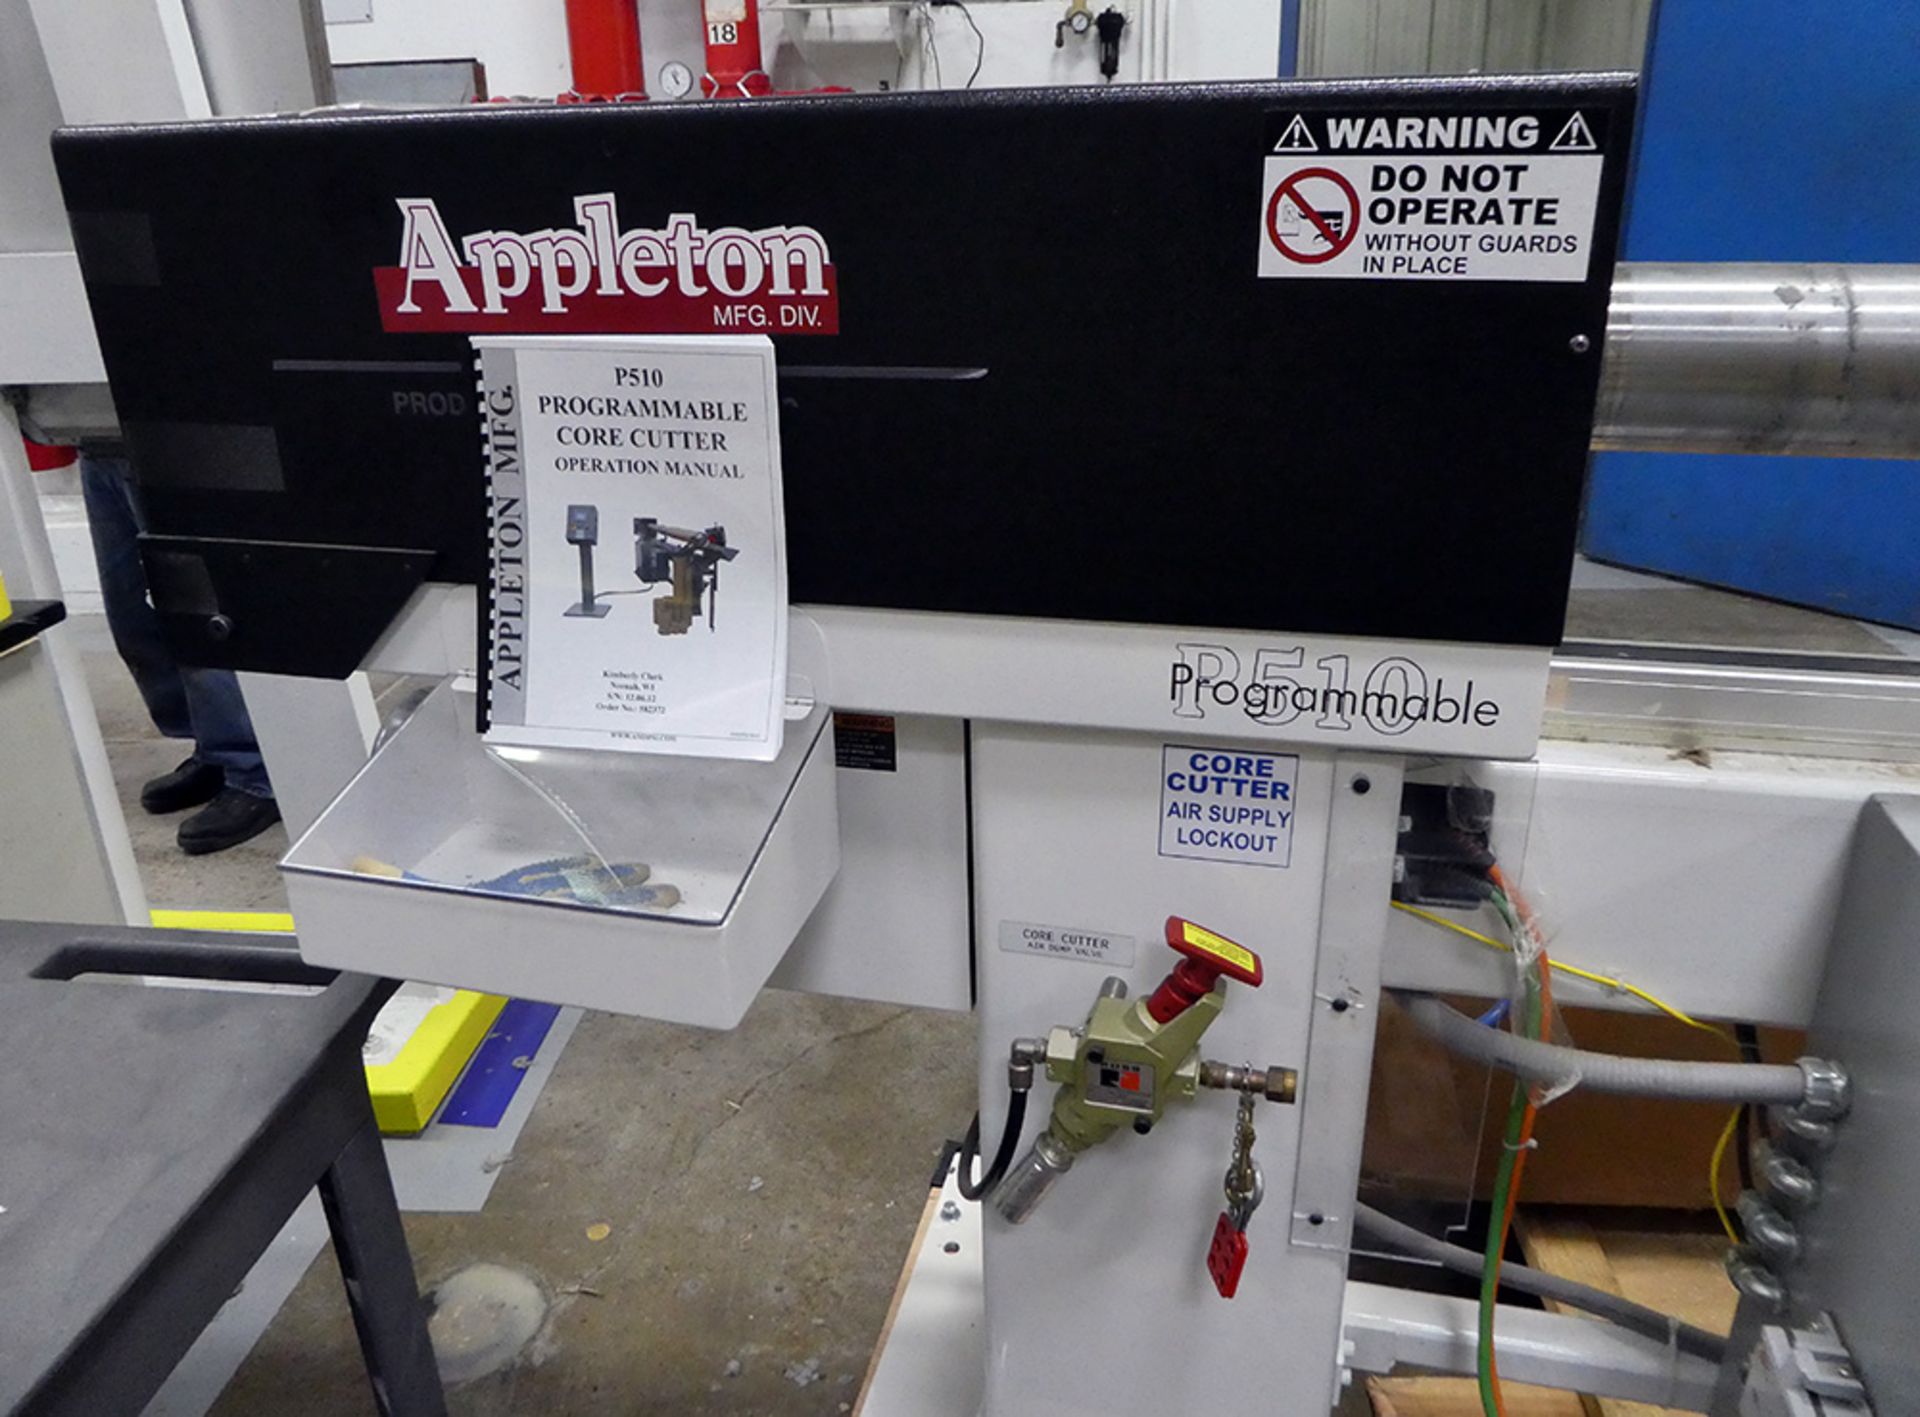 2012 120" Appleton Model P510 Programmable Automatic Core Cutter - Image 4 of 12